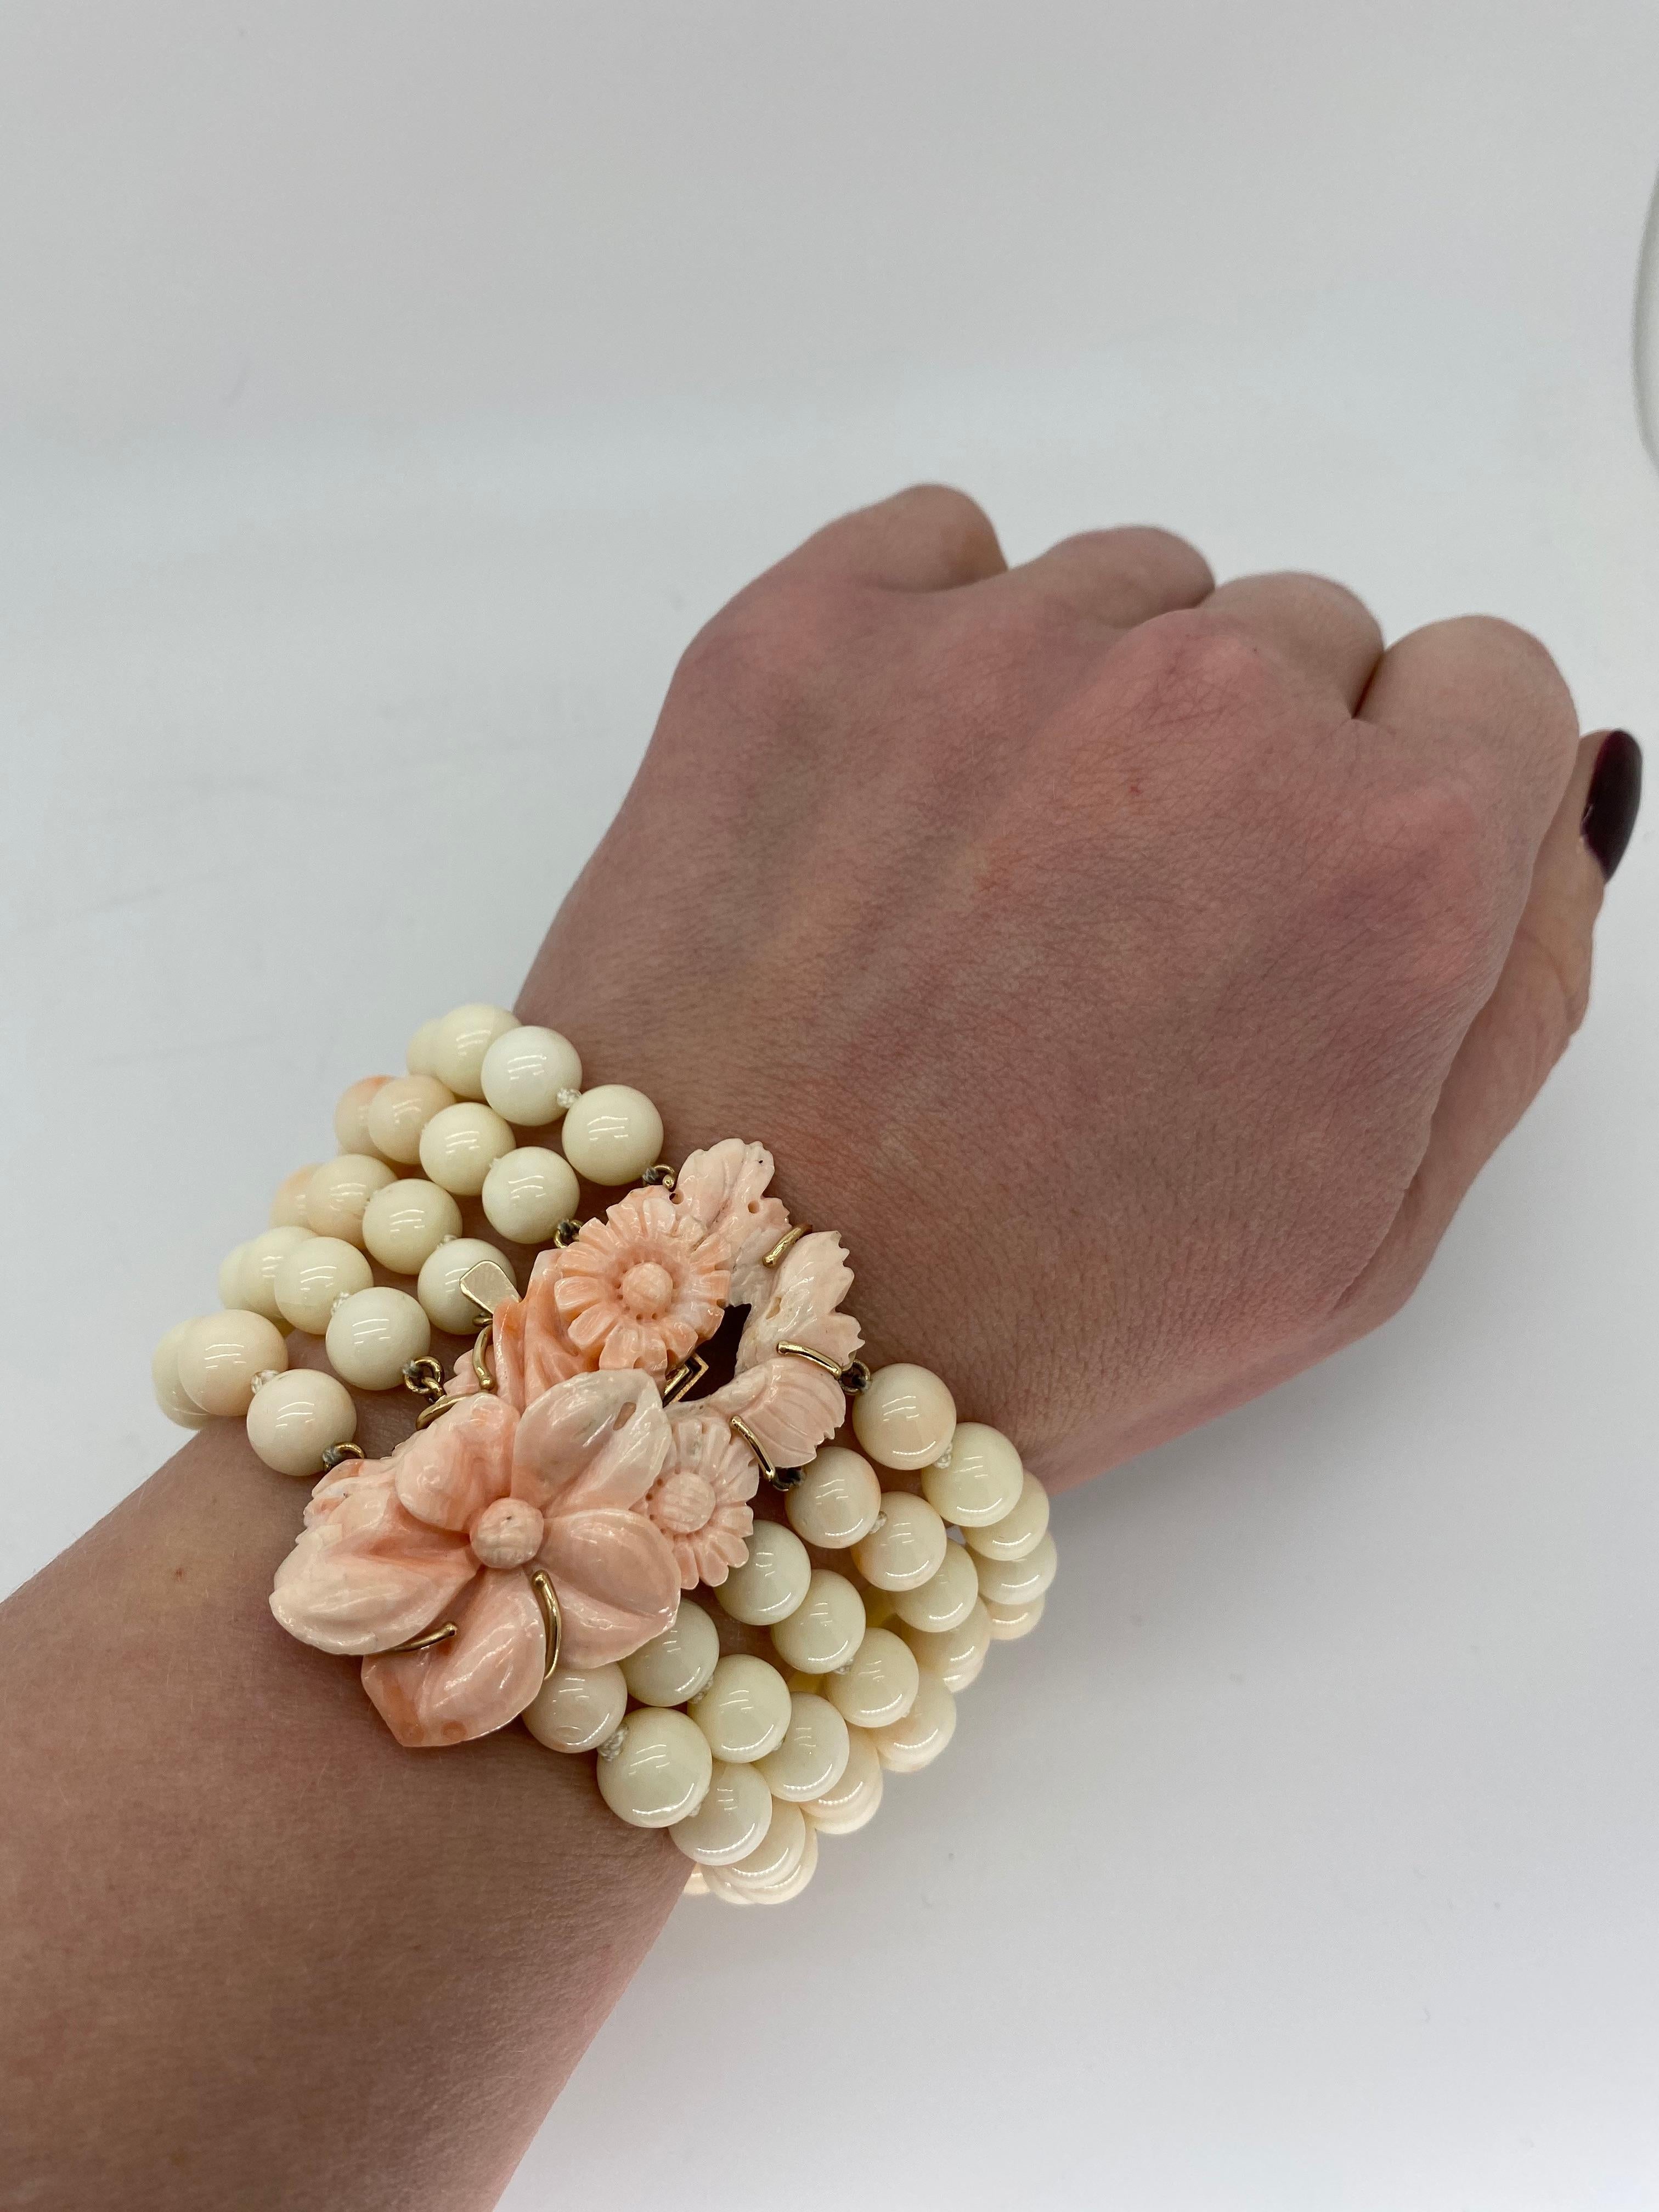 Unique hand crafted 5 strand carved coral bracelet made with 14k yellow gold. 

Gemstone: Coral
Gemstone Carat Weight: Coral Beads Approximately 8mm, Carved Coral Flowers Approximately 50x26mm
Metal: 14K Yellow Gold
Marked/Tested: Tested 14K